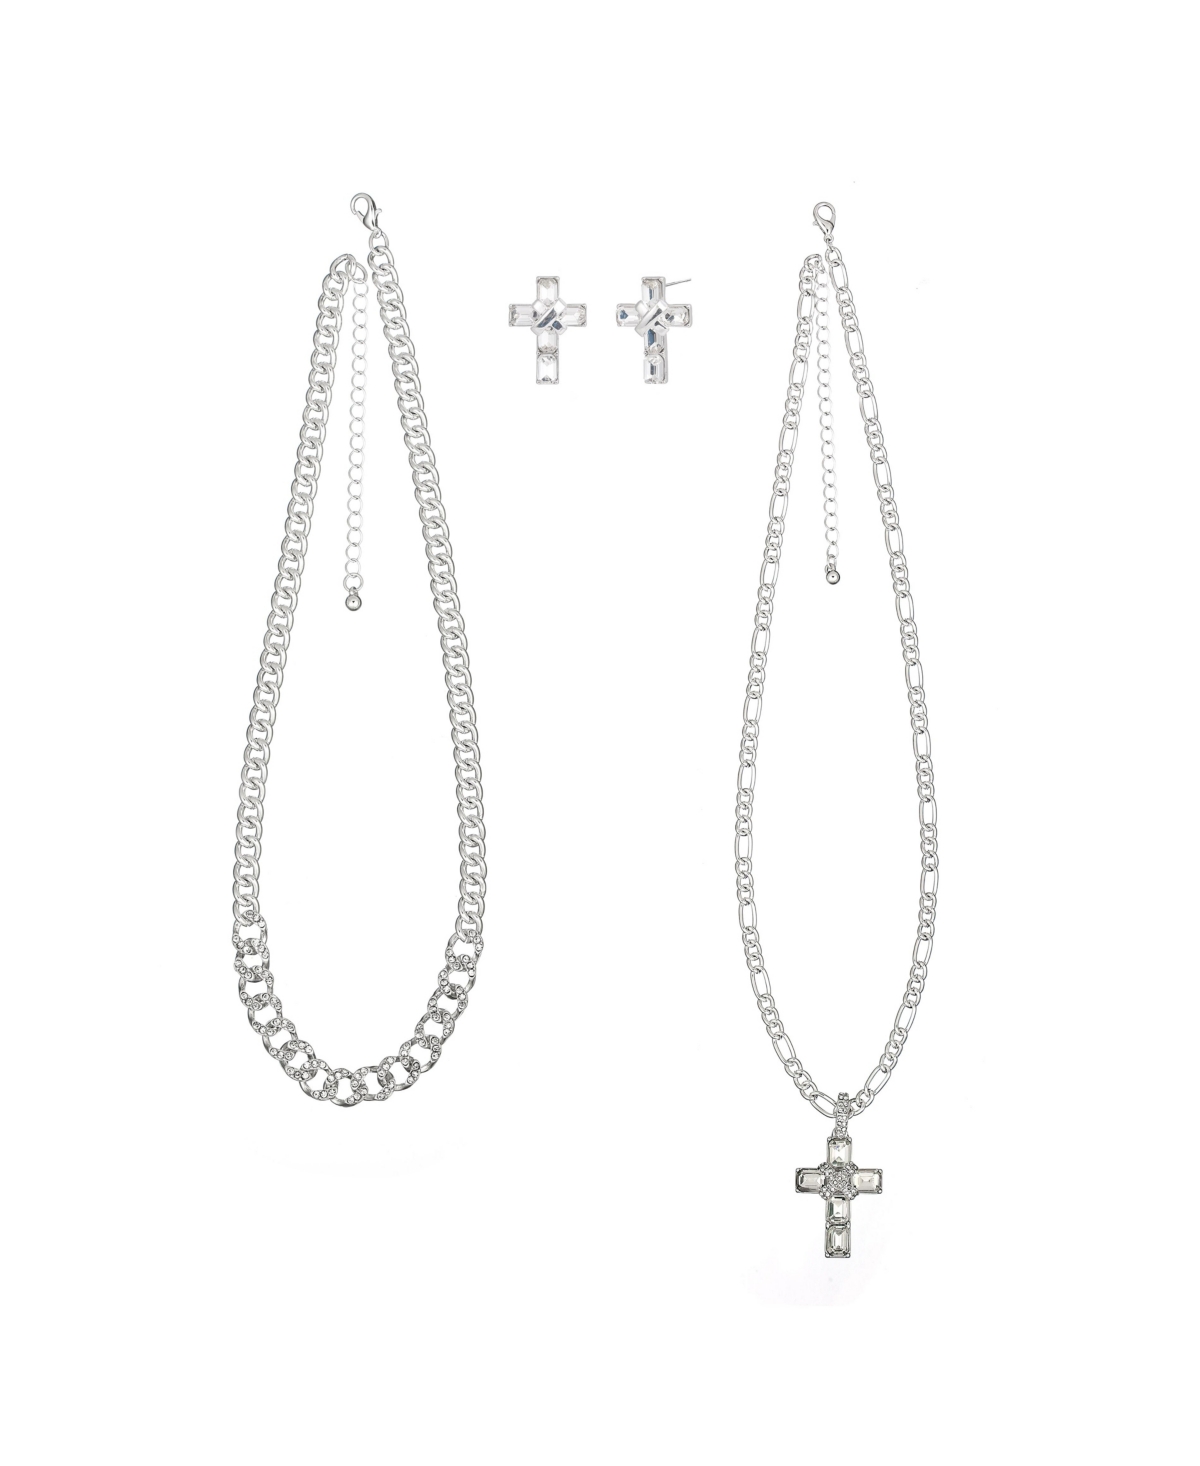 2Pc Cross Necklace And Earring Set - Silver